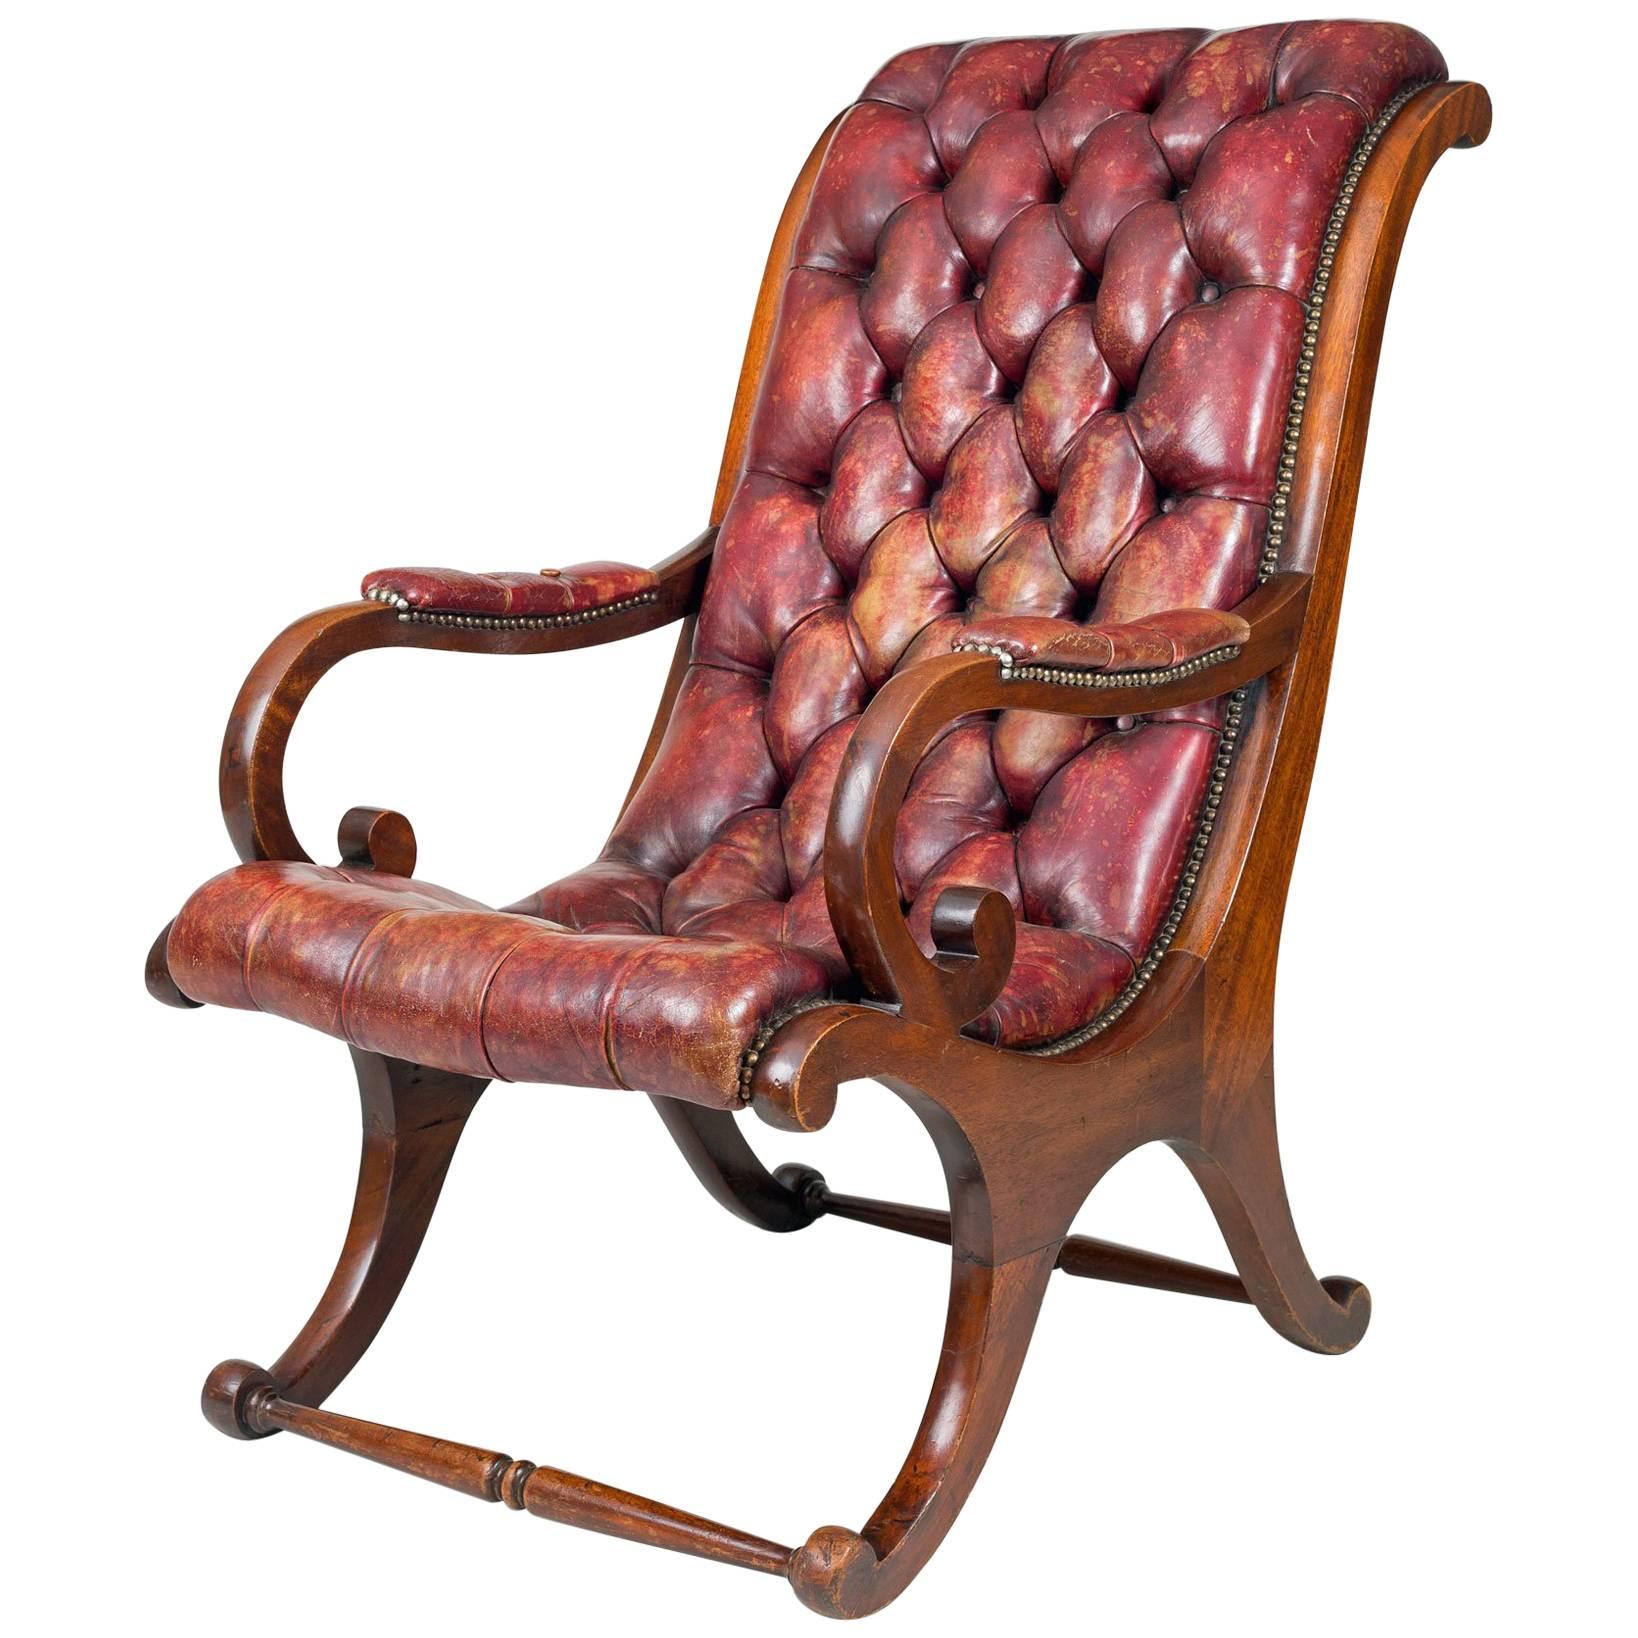 William iv Mahogany "Sleigh" Shaped Library Armchair For Sale